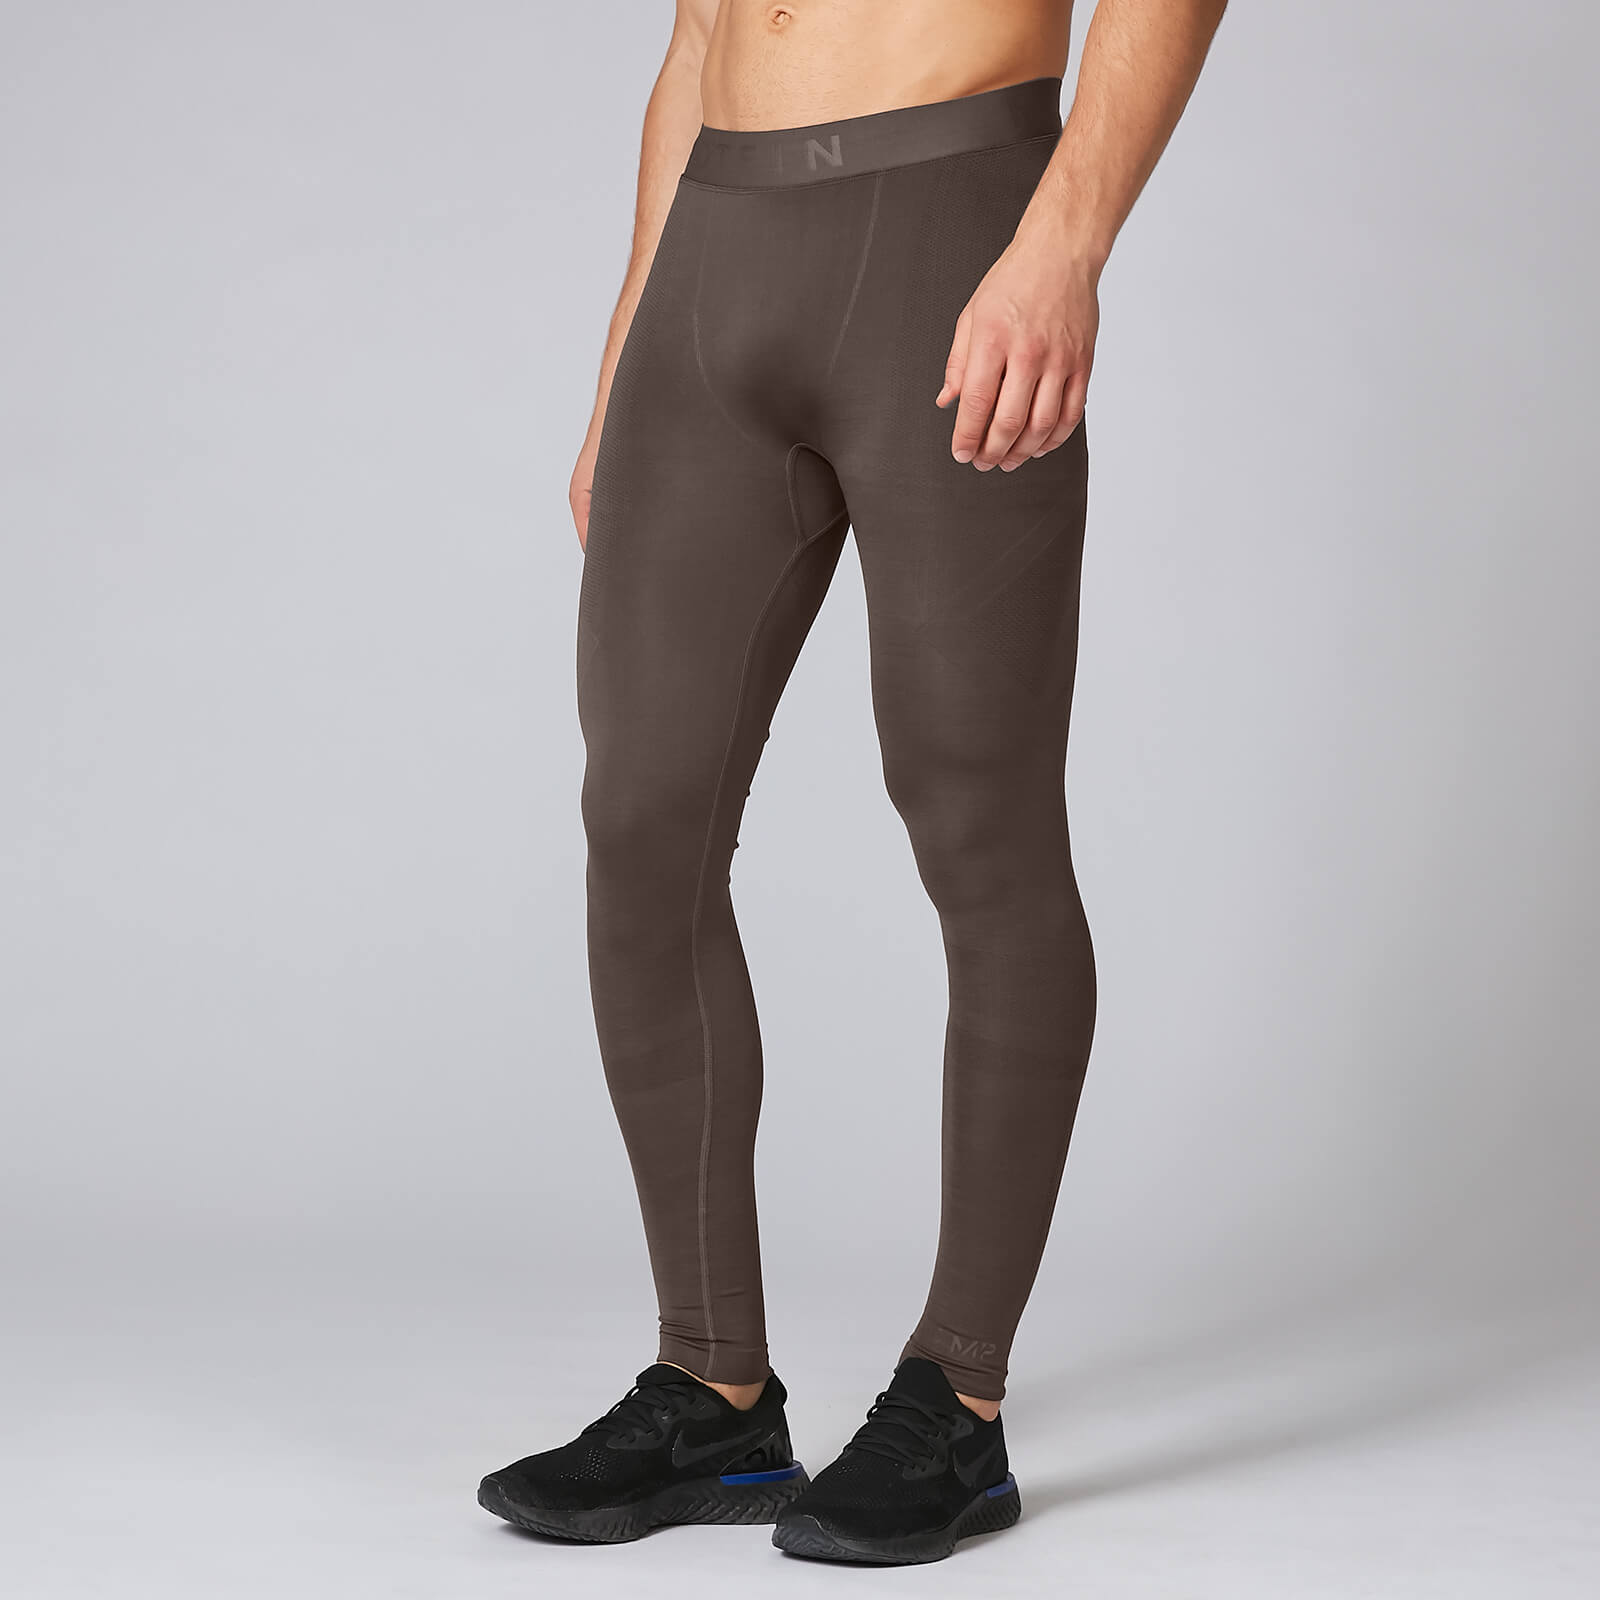 MP Elite Seamless Tights - Driftwood - S